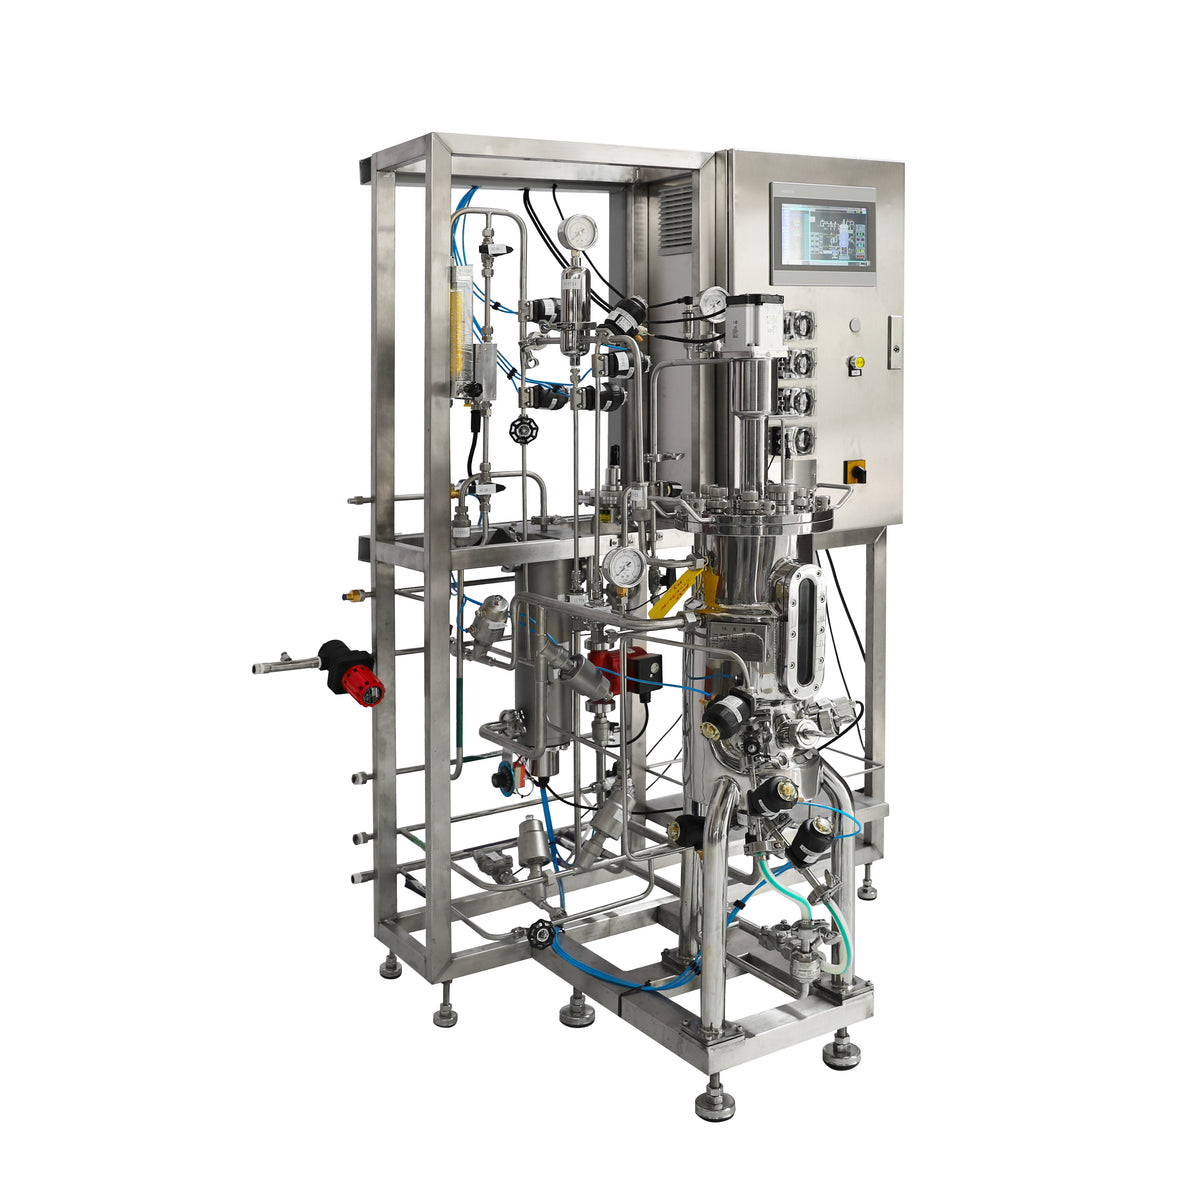 15L Stainless Steel Bioreactor for Microbial Fermentation with 2 Gas Inlets BR500-M1